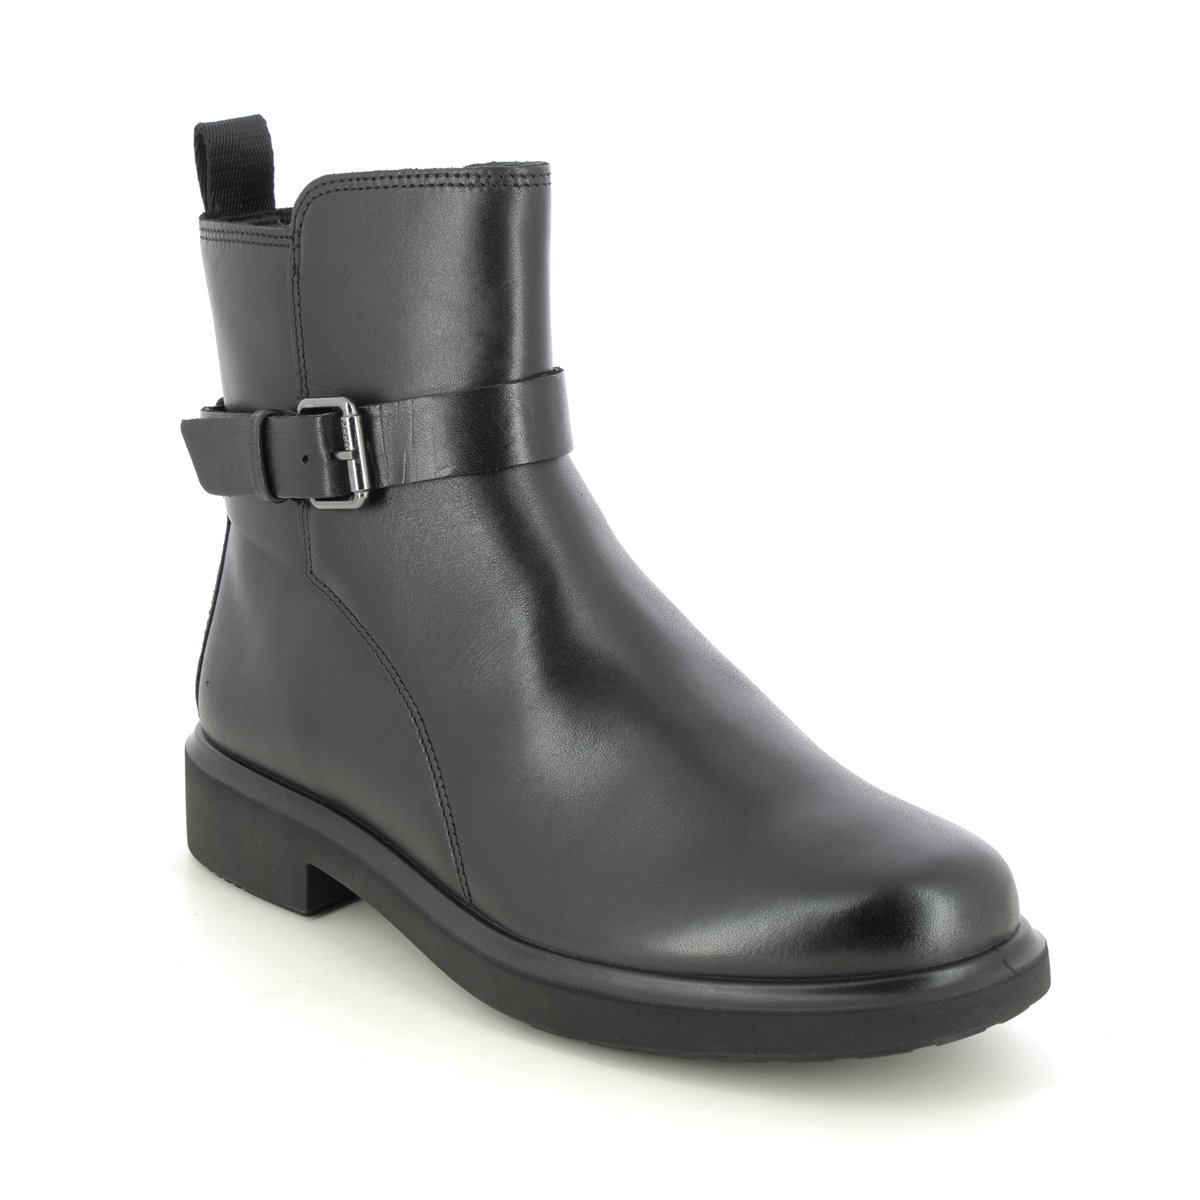 ECCO Amsterdam Tex Metropole Black leather Womens ankle boots 222013-01001 in a Plain Leather in Size 41